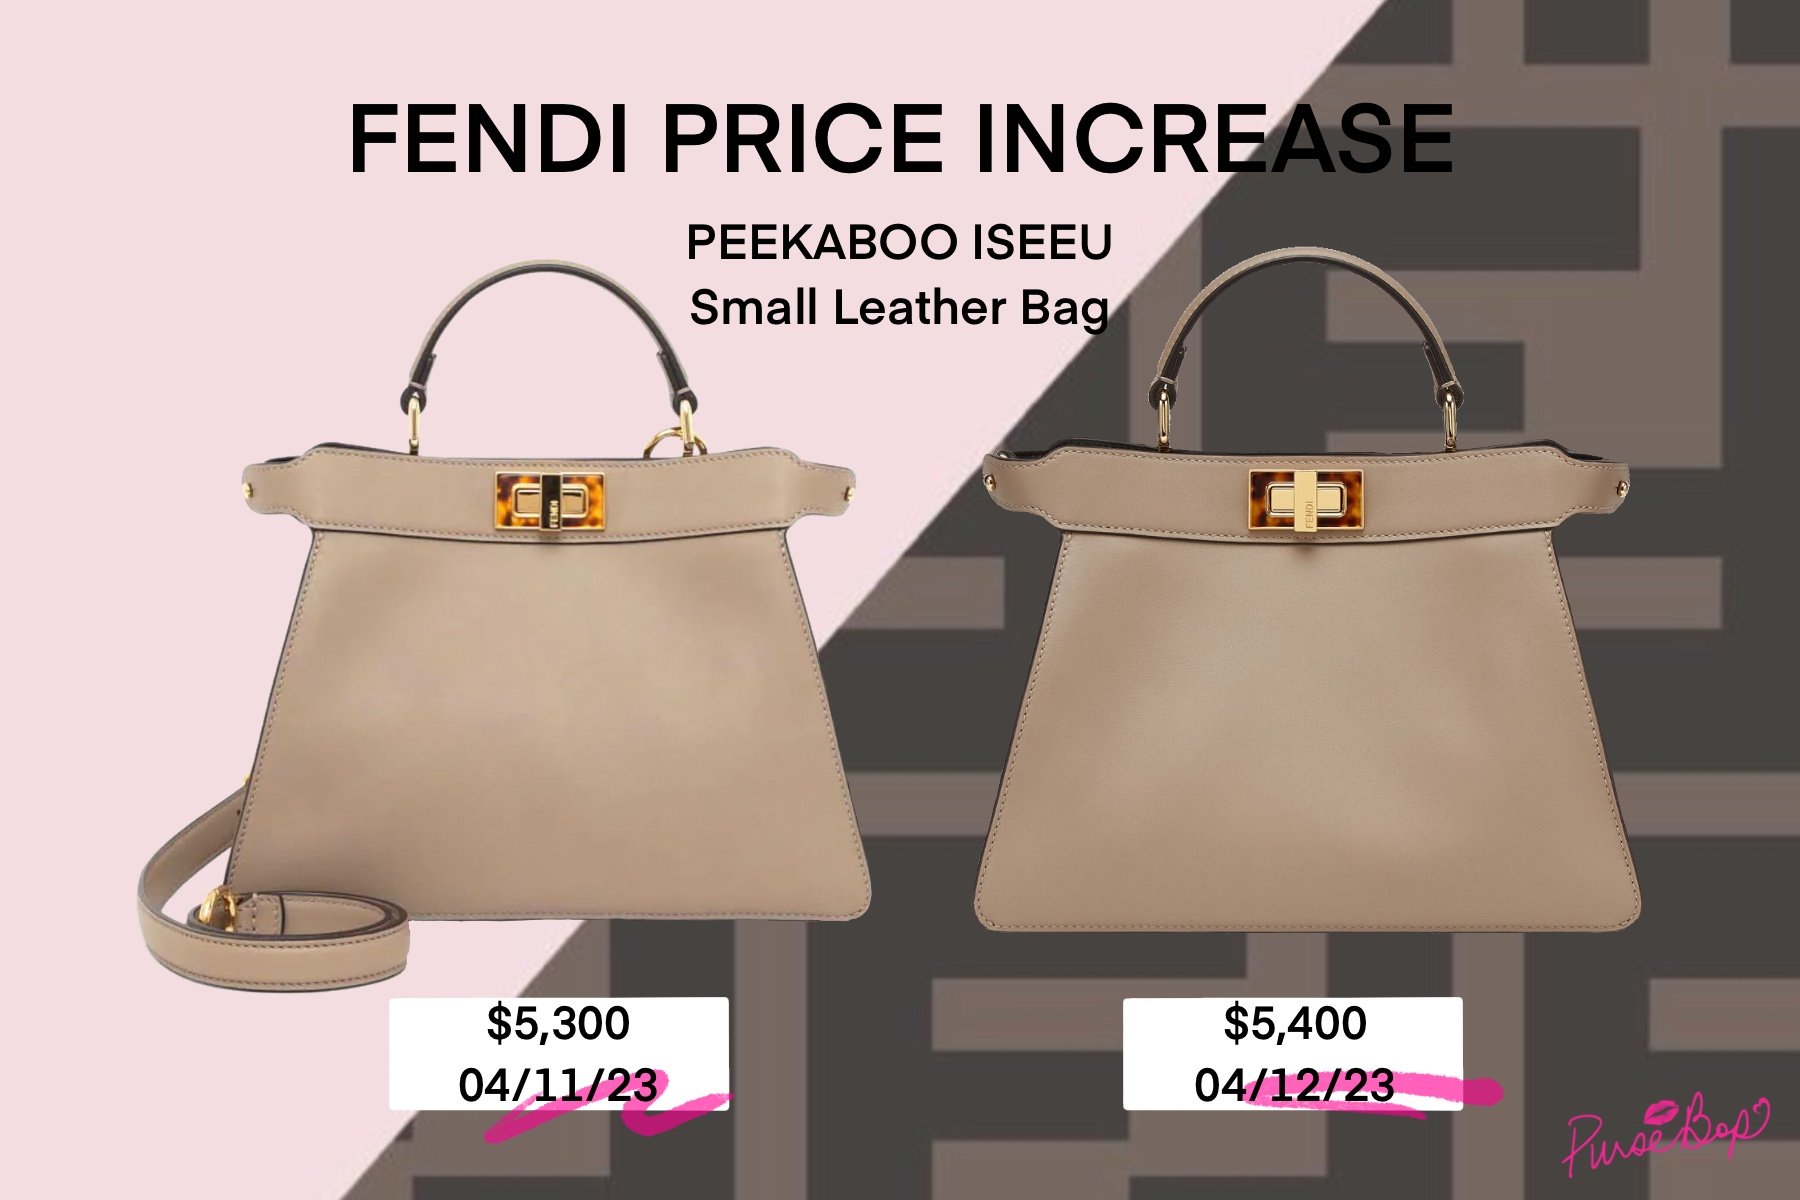 Here We Go Again: Yet Another Fendi Price Increase in 2023